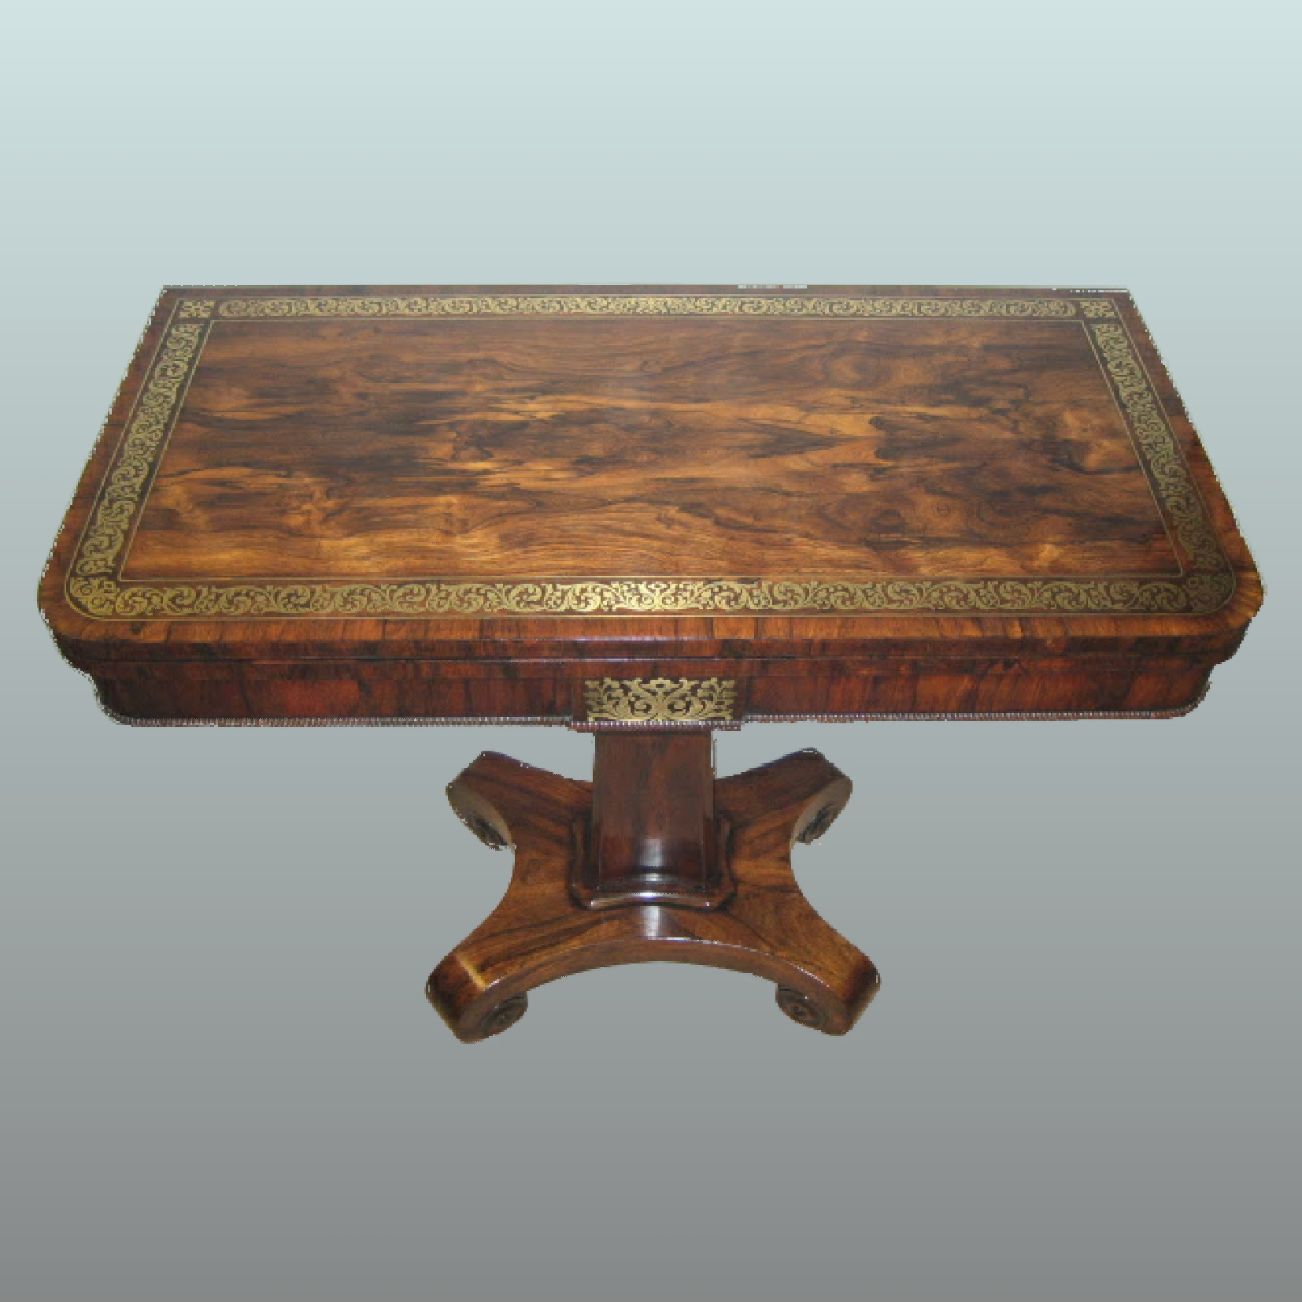 A 1830's rosewood table fully restored to bring out the beauty of the wood.